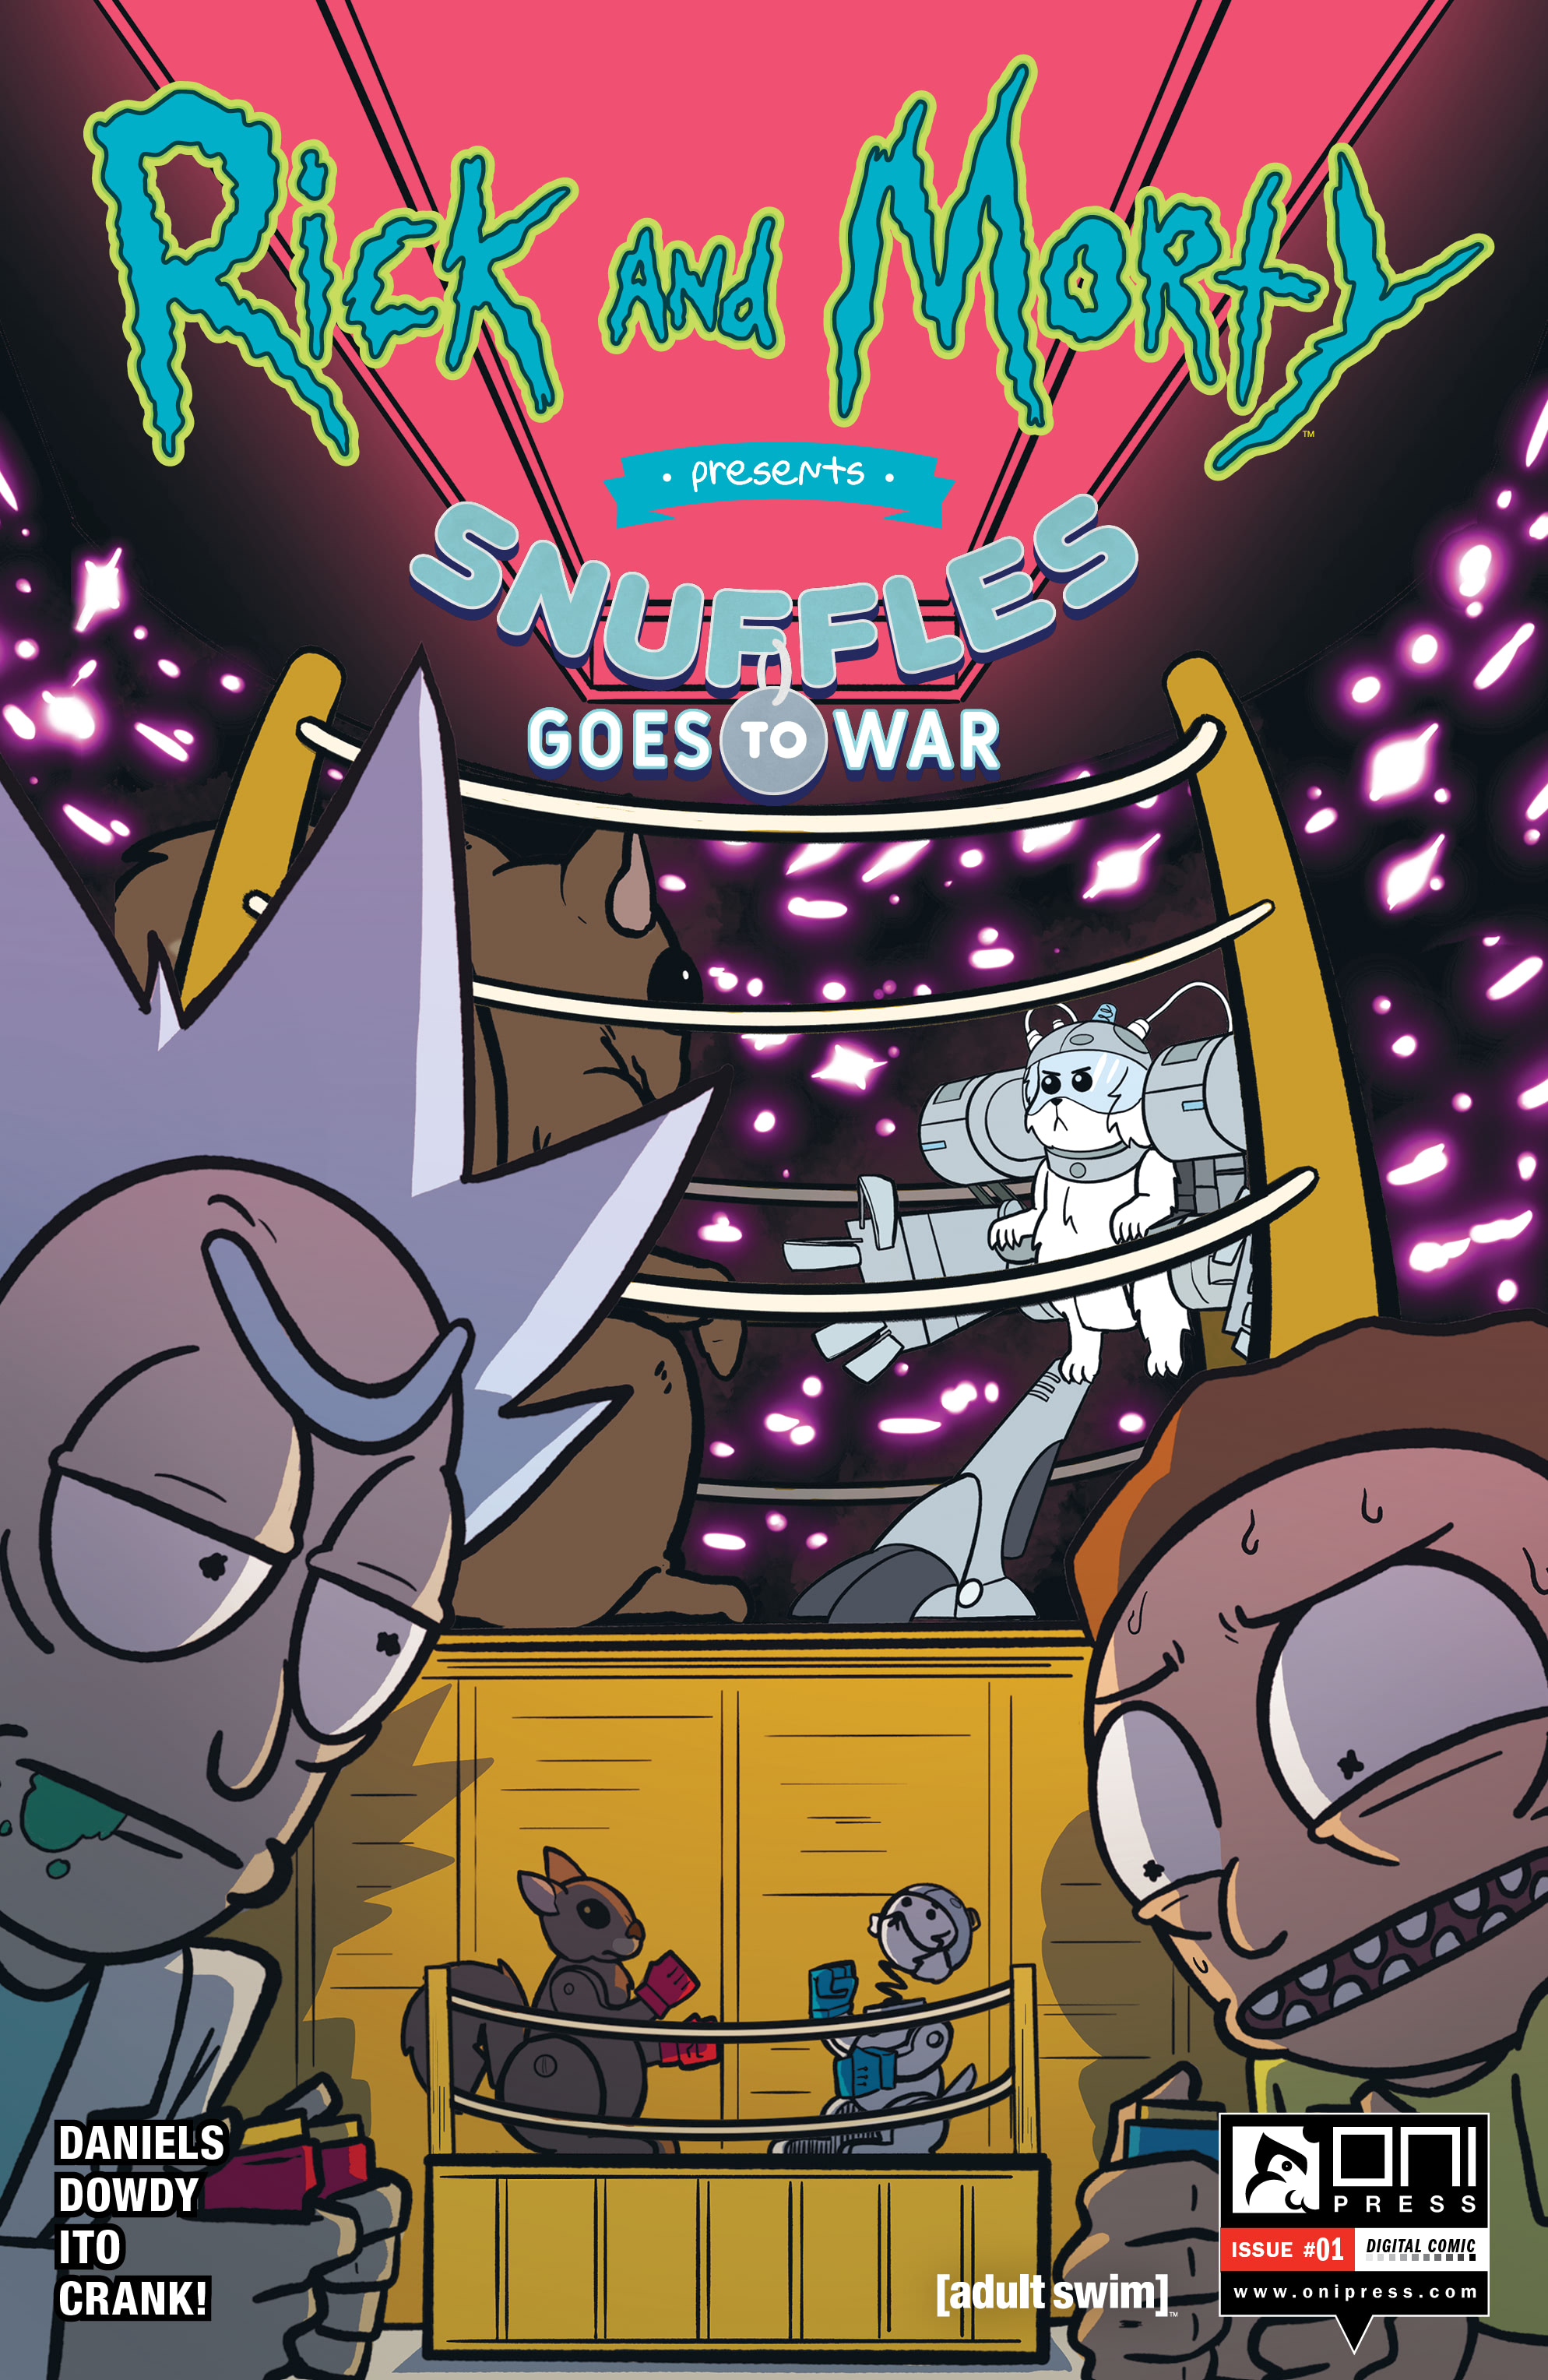 Rick and Morty Presents: Snuffles Goes to War (2021): Chapter 1 - Page 1